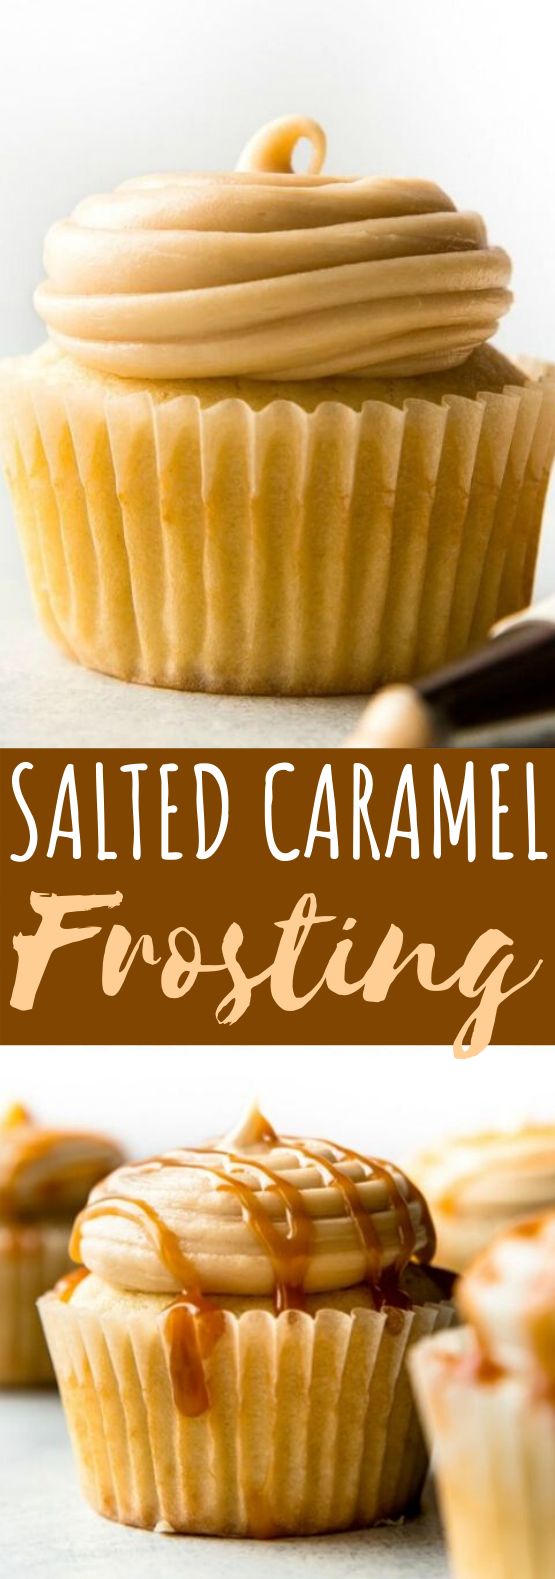 Salted Caramel Frosting #desserts #cake #cupcakes #frosting #cookies